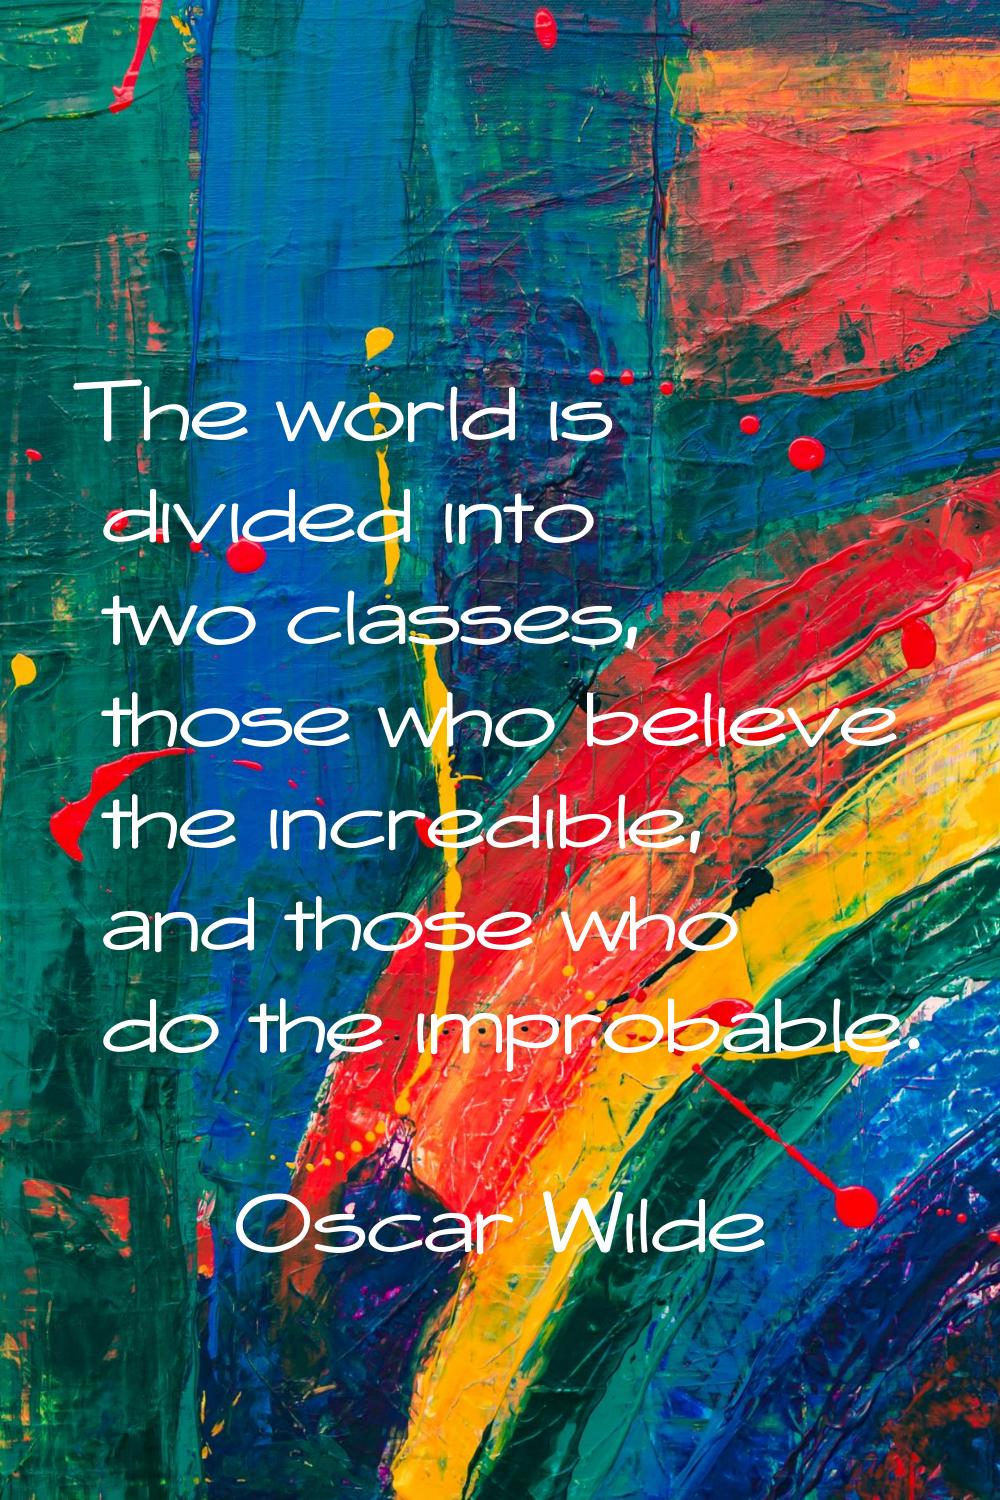 The world is divided into two classes, those who believe the incredible, and those who do the impro